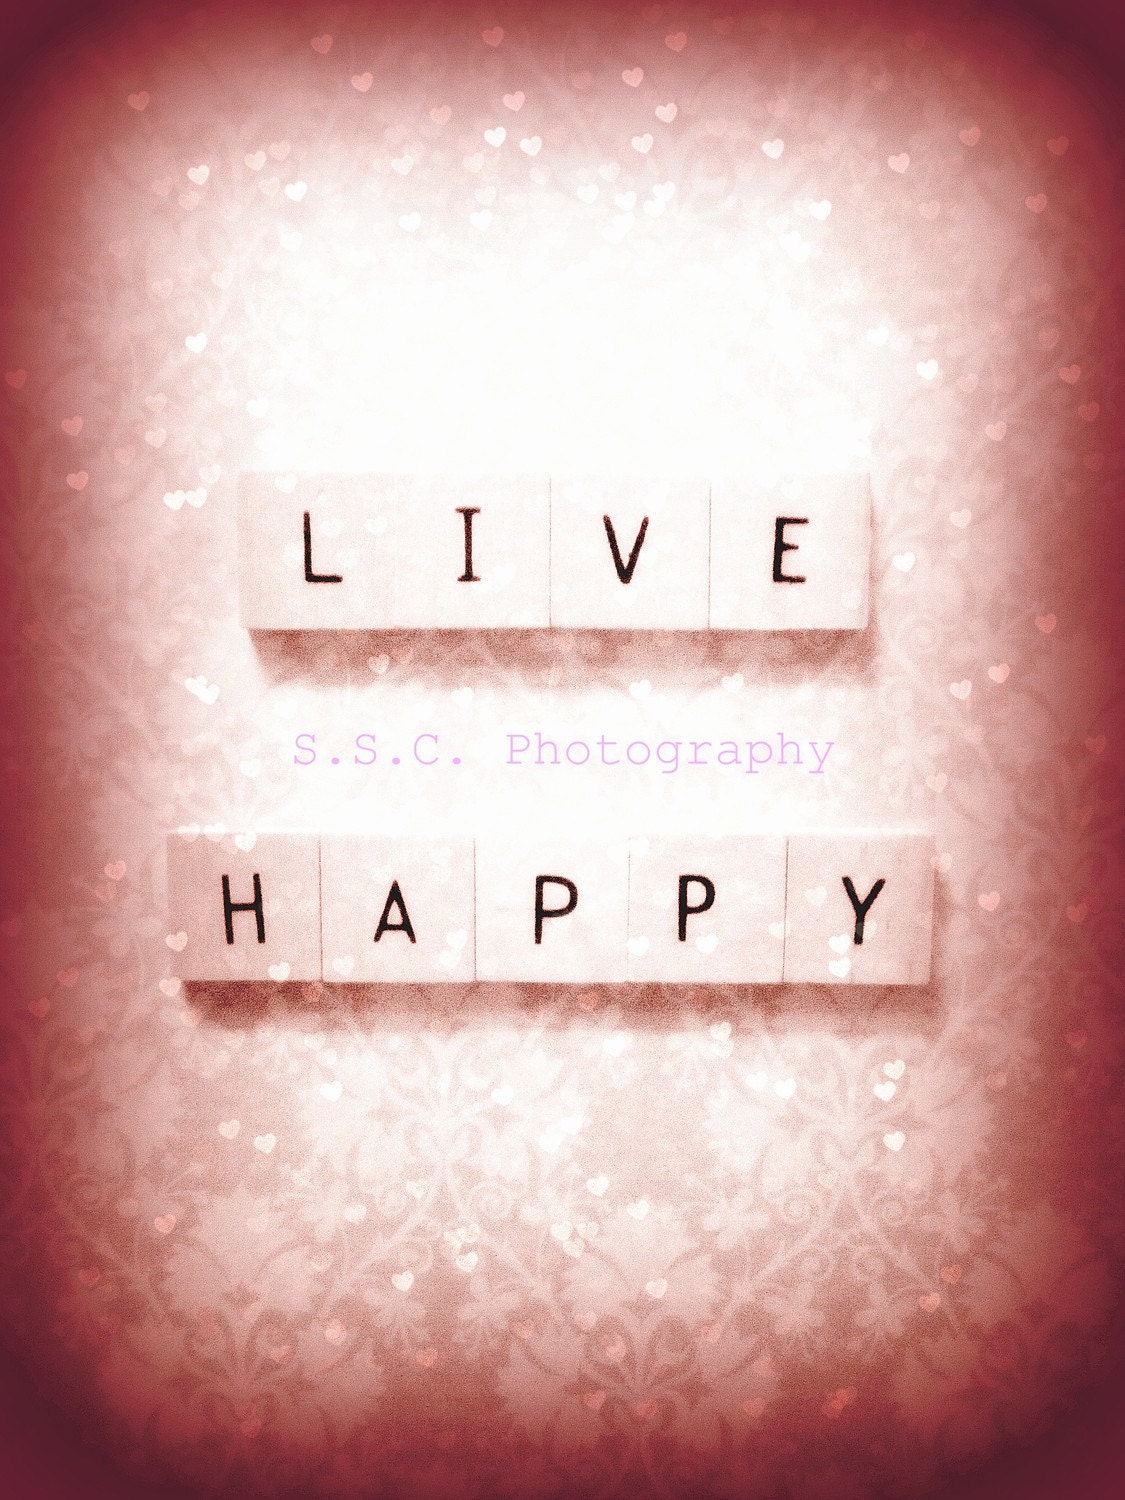 Live Happy 8.5 x 11 inch Photo w/thin white border for framing (NEW also available in larger sizes - see details)